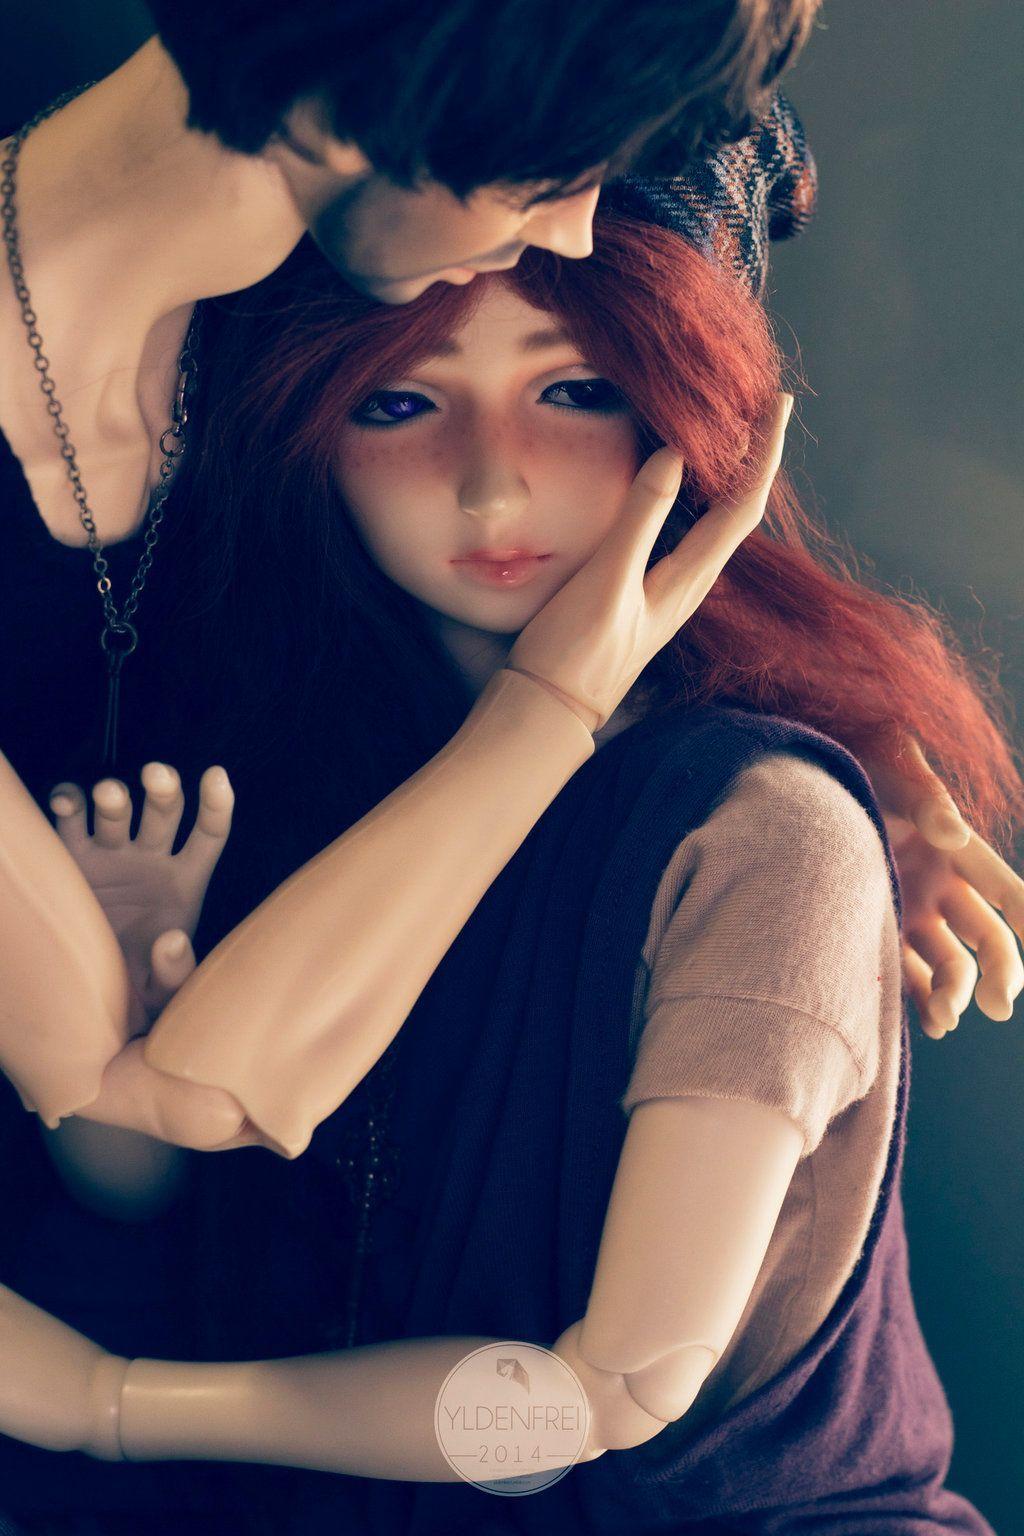 Cute Doll Couple Wallpapers - Top Free Cute Doll Couple ...